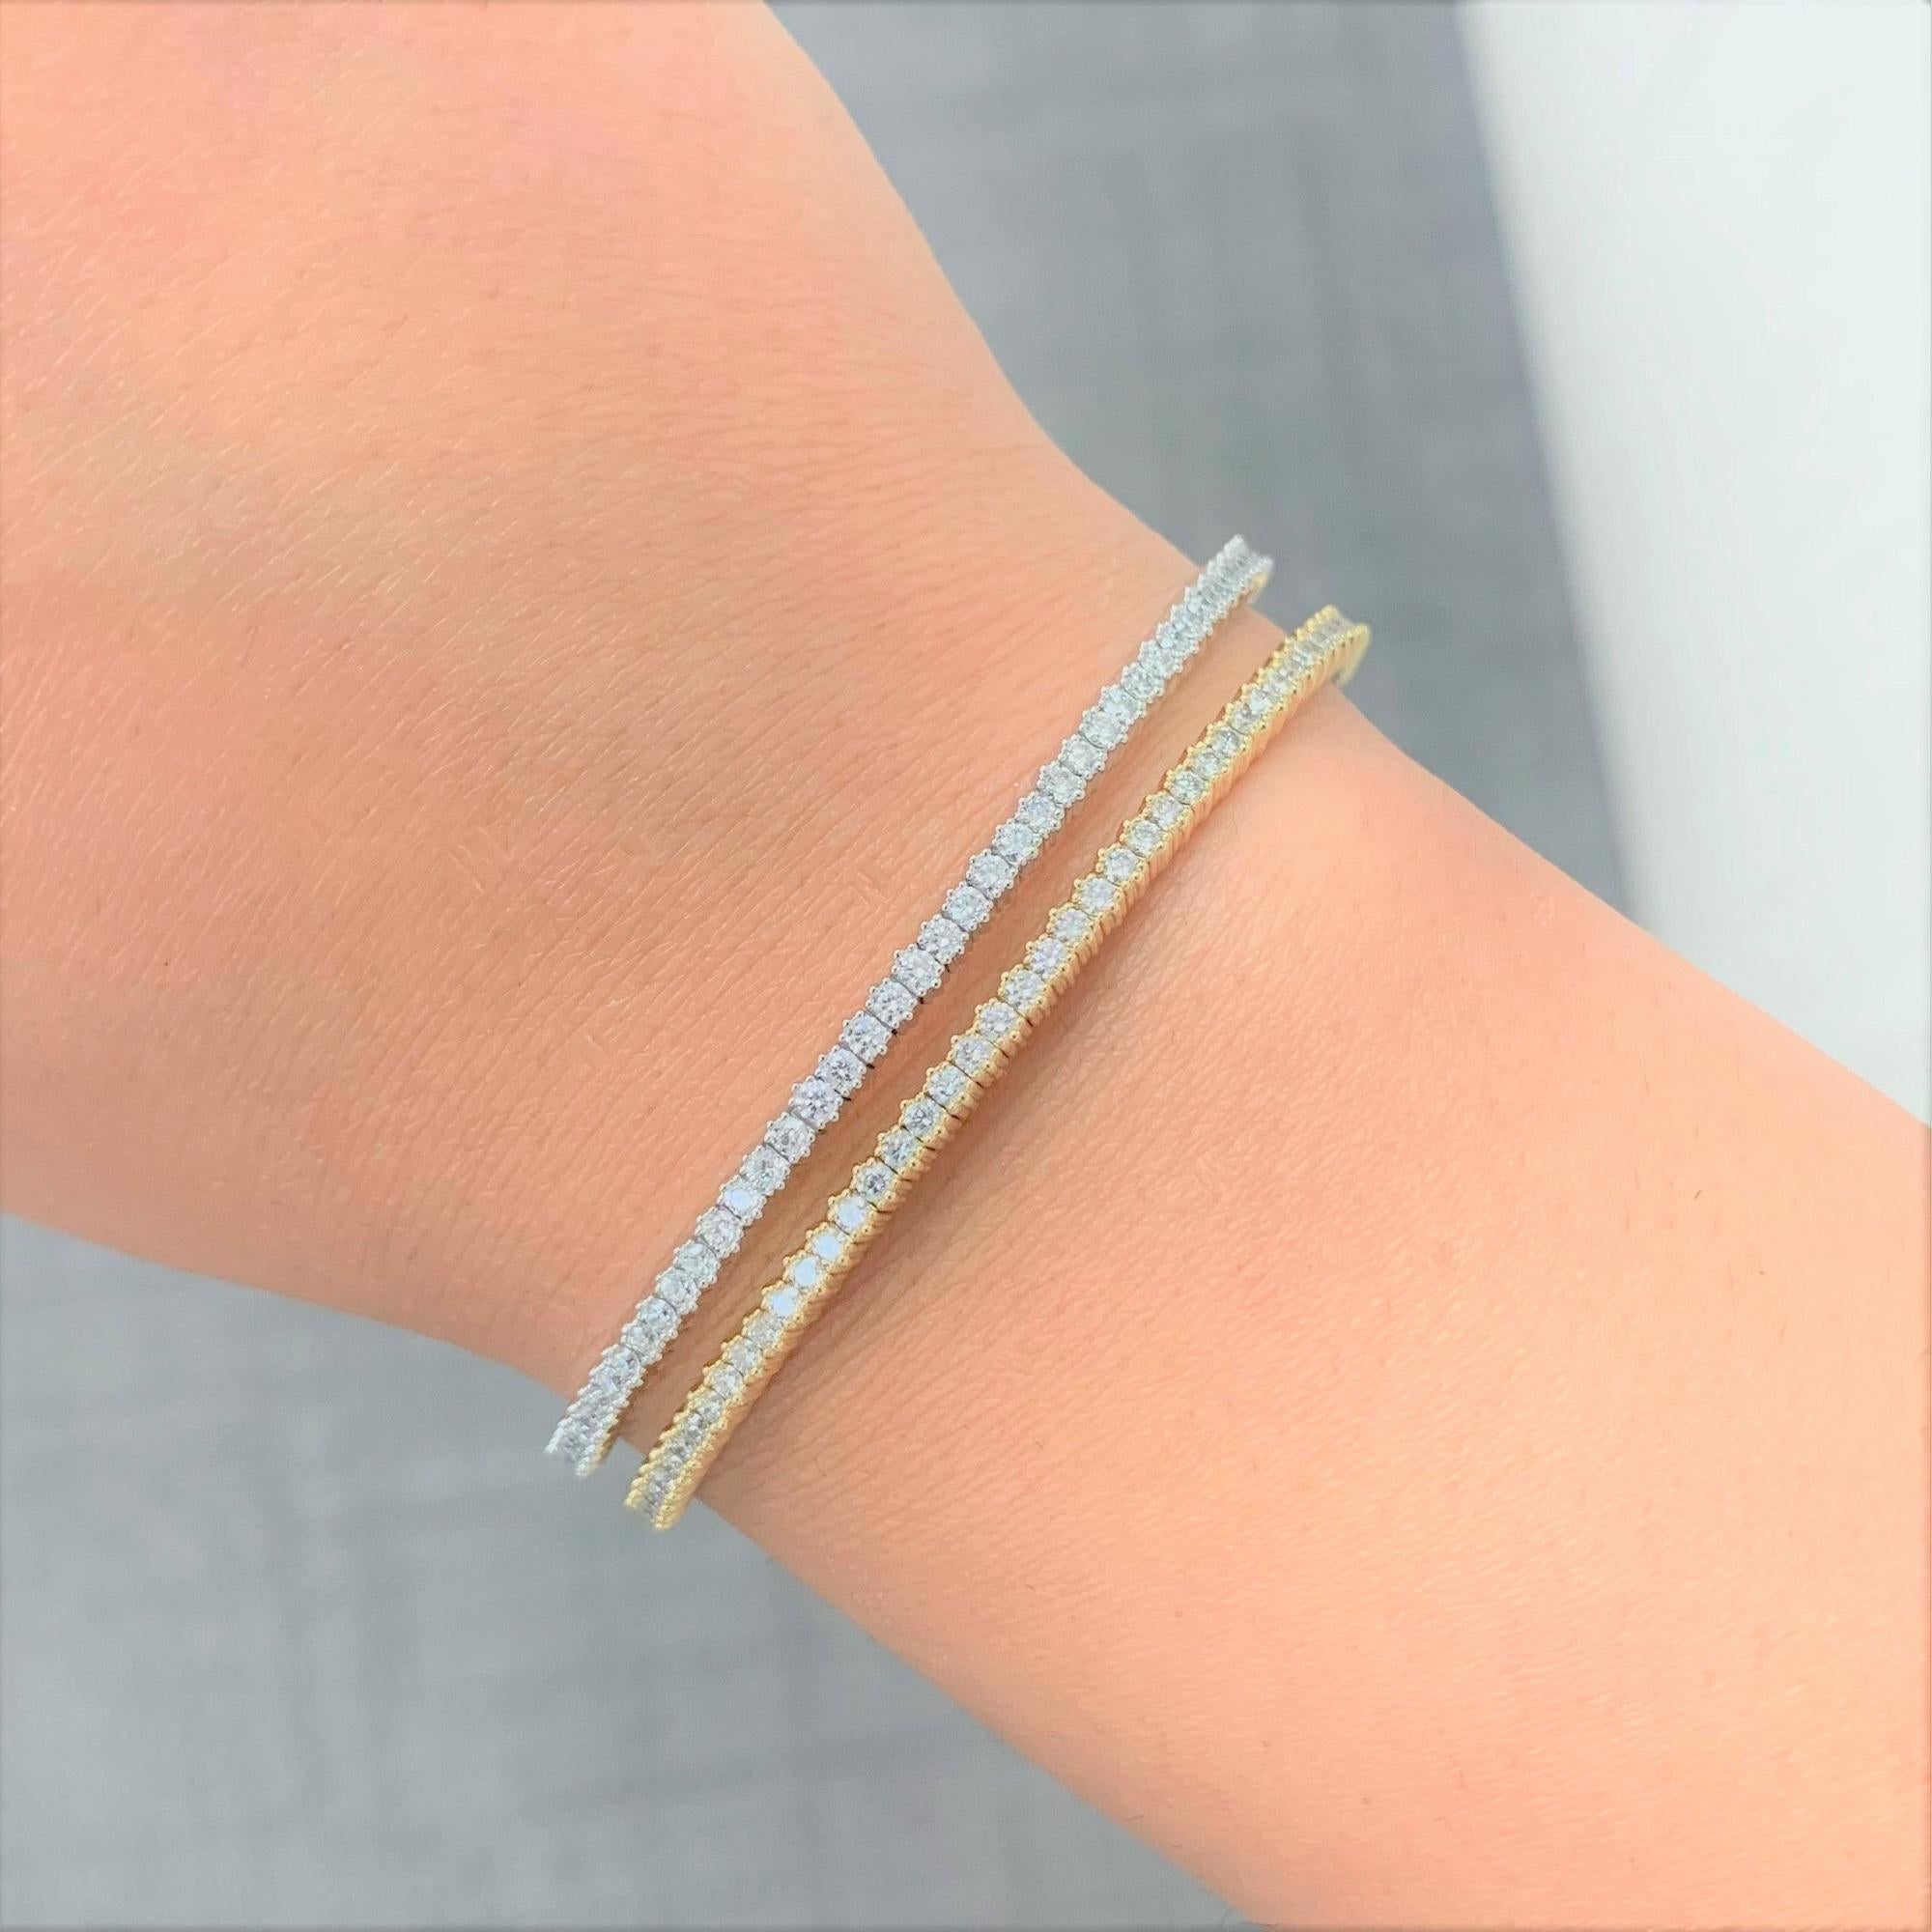 Crafted of 14K Gold this Gorgeous and Classic Diamond Single Row Bangle features 1 carat of round Diamonds. Color and Clarity is GH-SI. One of the Best-Sellers of the Joelle Collection! This bangle is available in White & Yellow Gold. This bangle